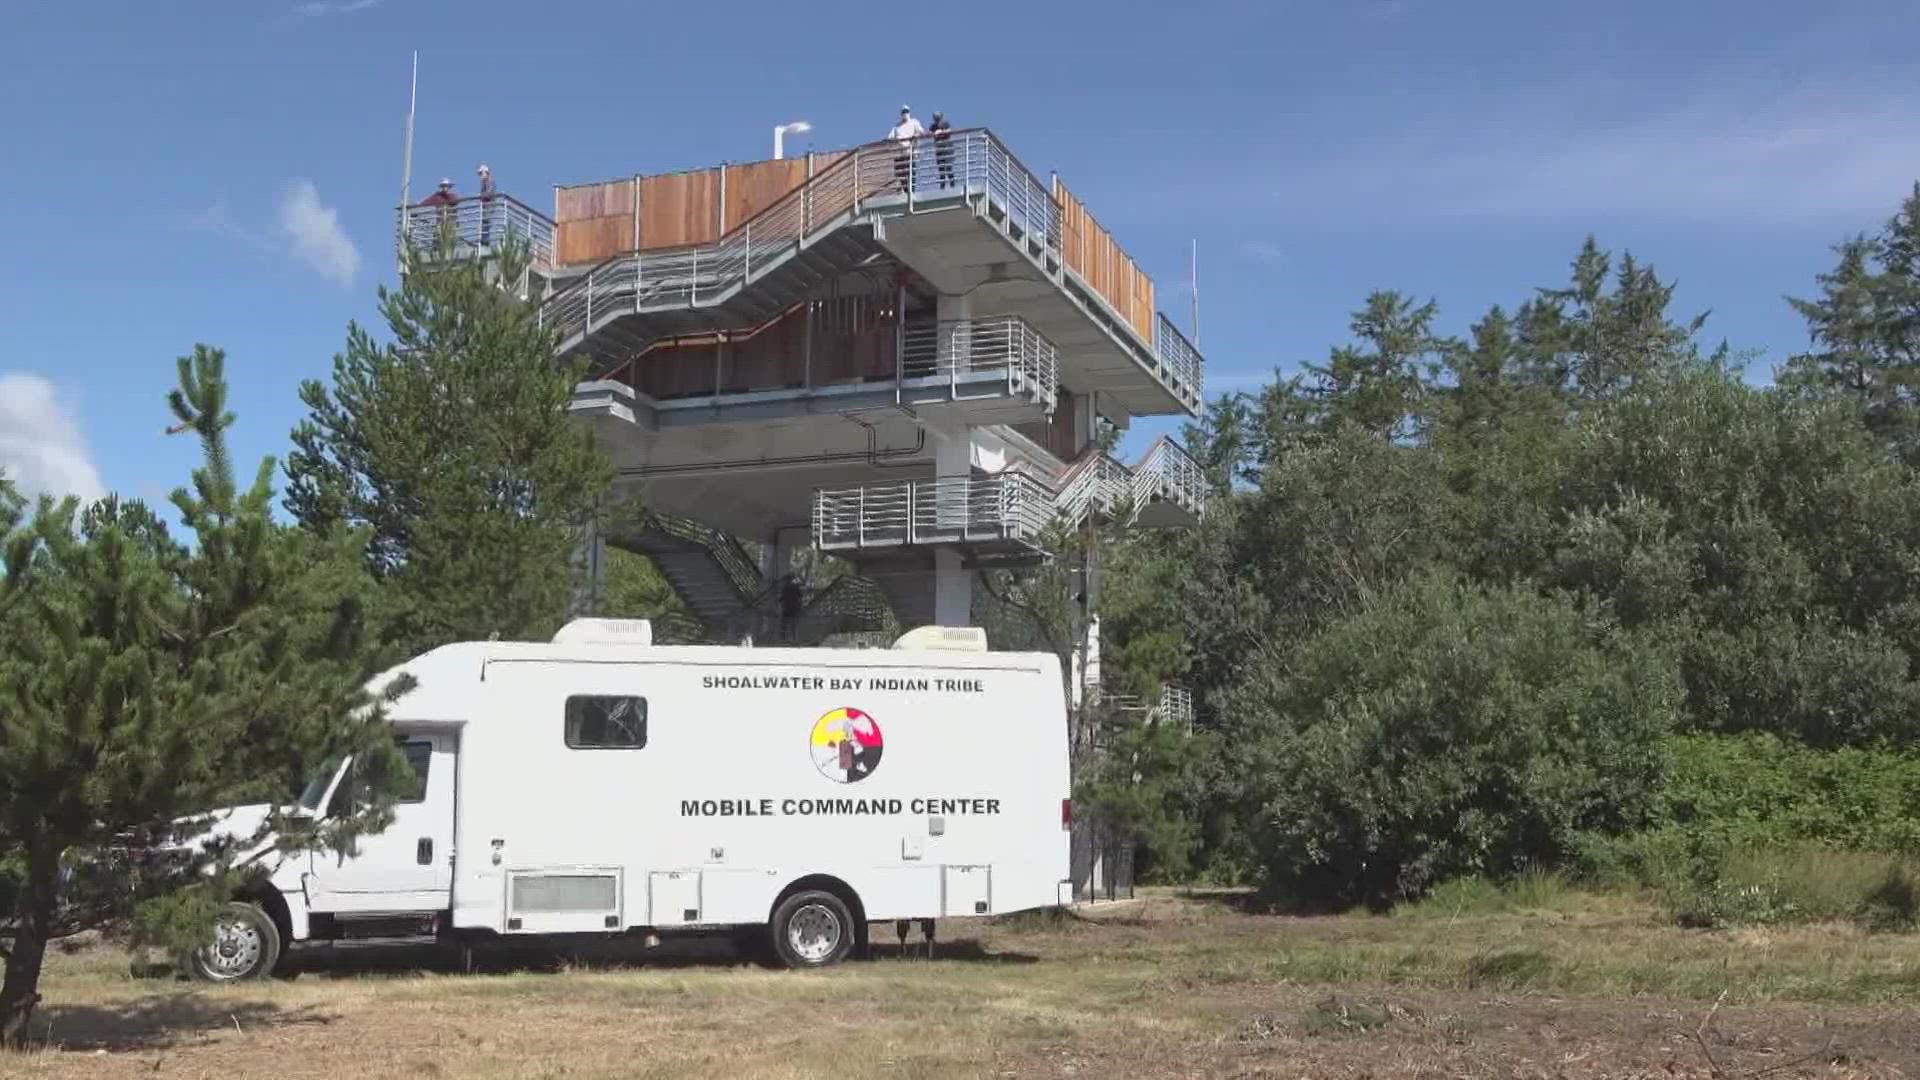 On Friday, the Shoalwater Bay Indian Tribe and partners unveiled a vertical evacuation tower meant to save hundreds in the case of a tsunami.